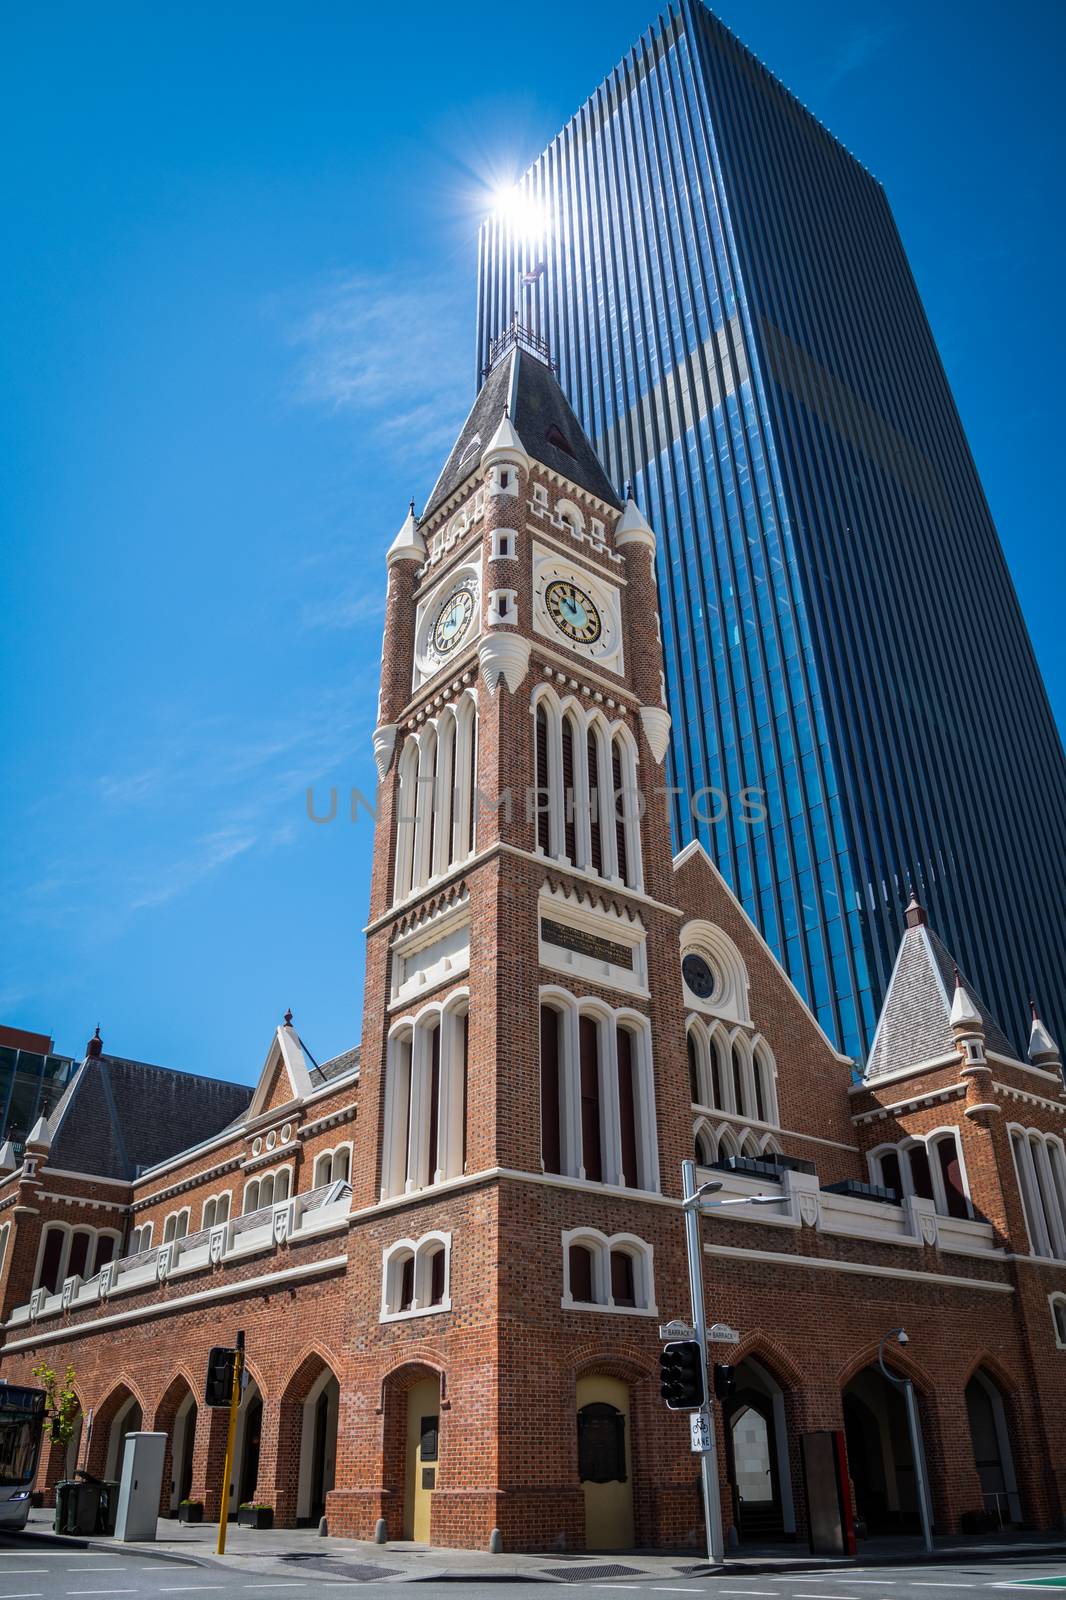 Perth Town Hall in Western Australia old brick building in front of modern skyscraper by MXW_Stock